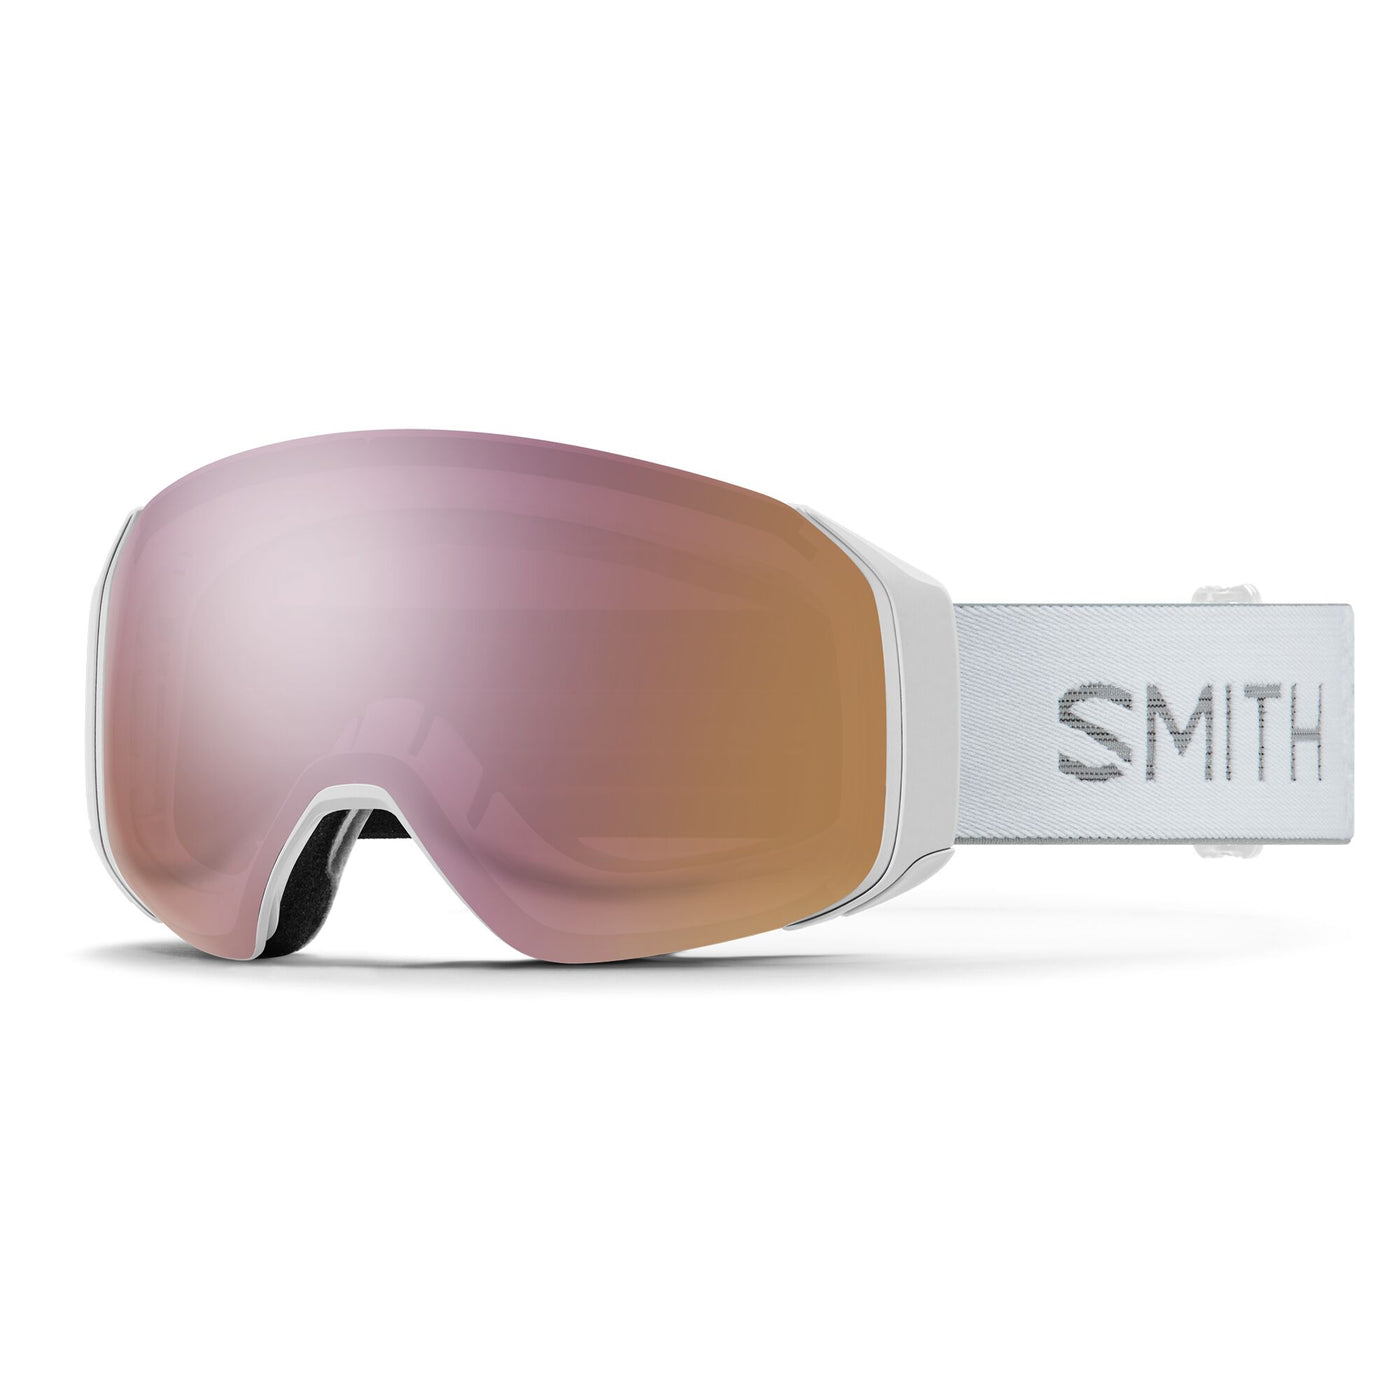 Smith 24 4D MAG S - White Chunky Knit - CP EvDay Rose Gold Mir/CP Storm Rose Flash